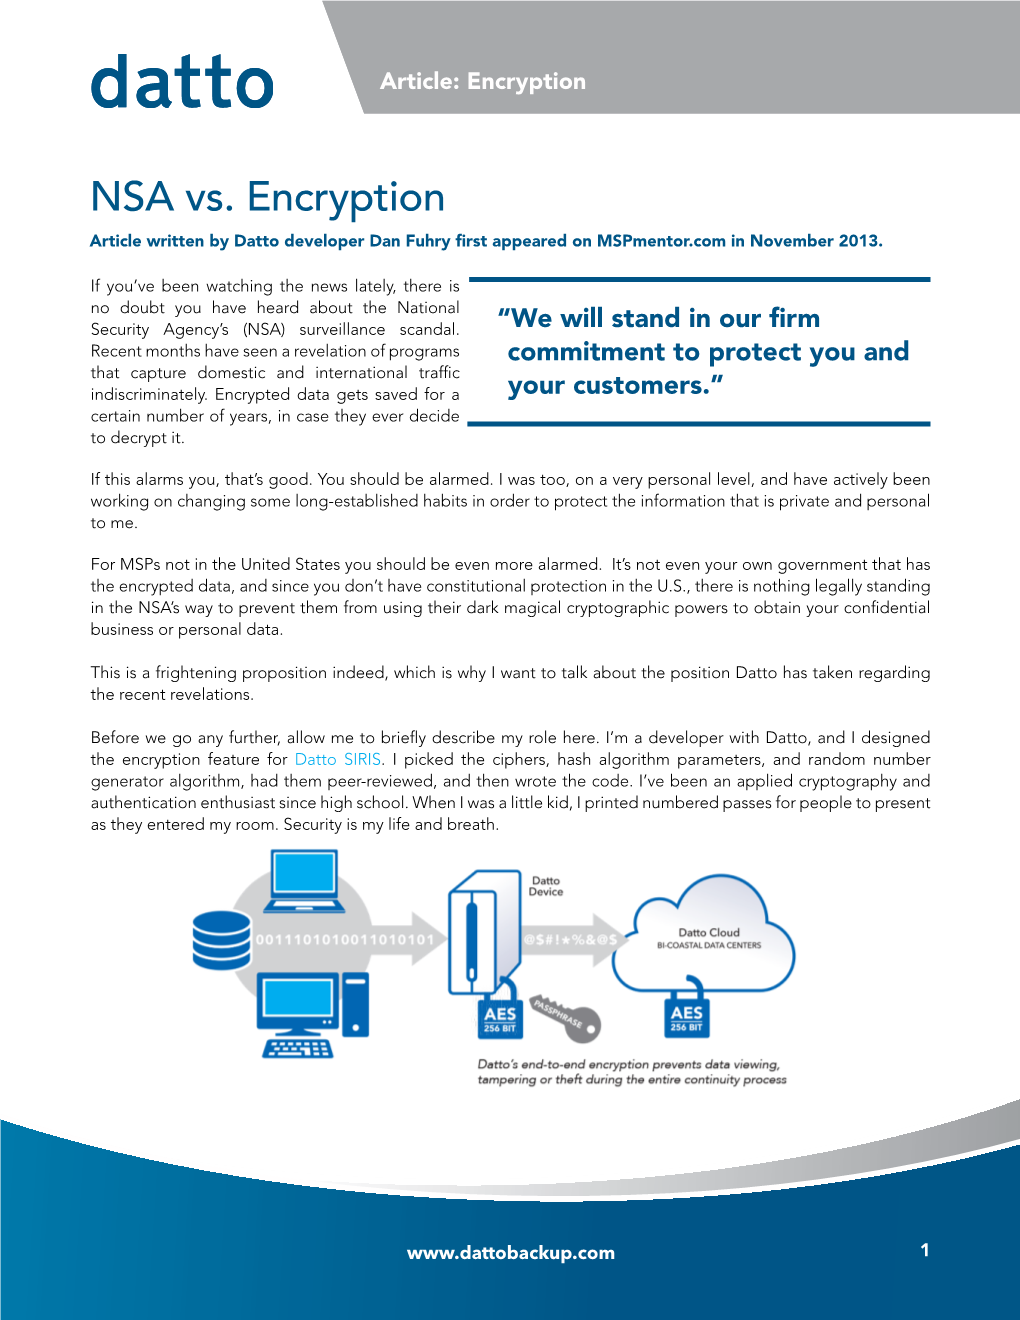 NSA Vs. Encryption Article Written by Datto Developer Dan Fuhry First Appeared on Mspmentor.Com in November 2013